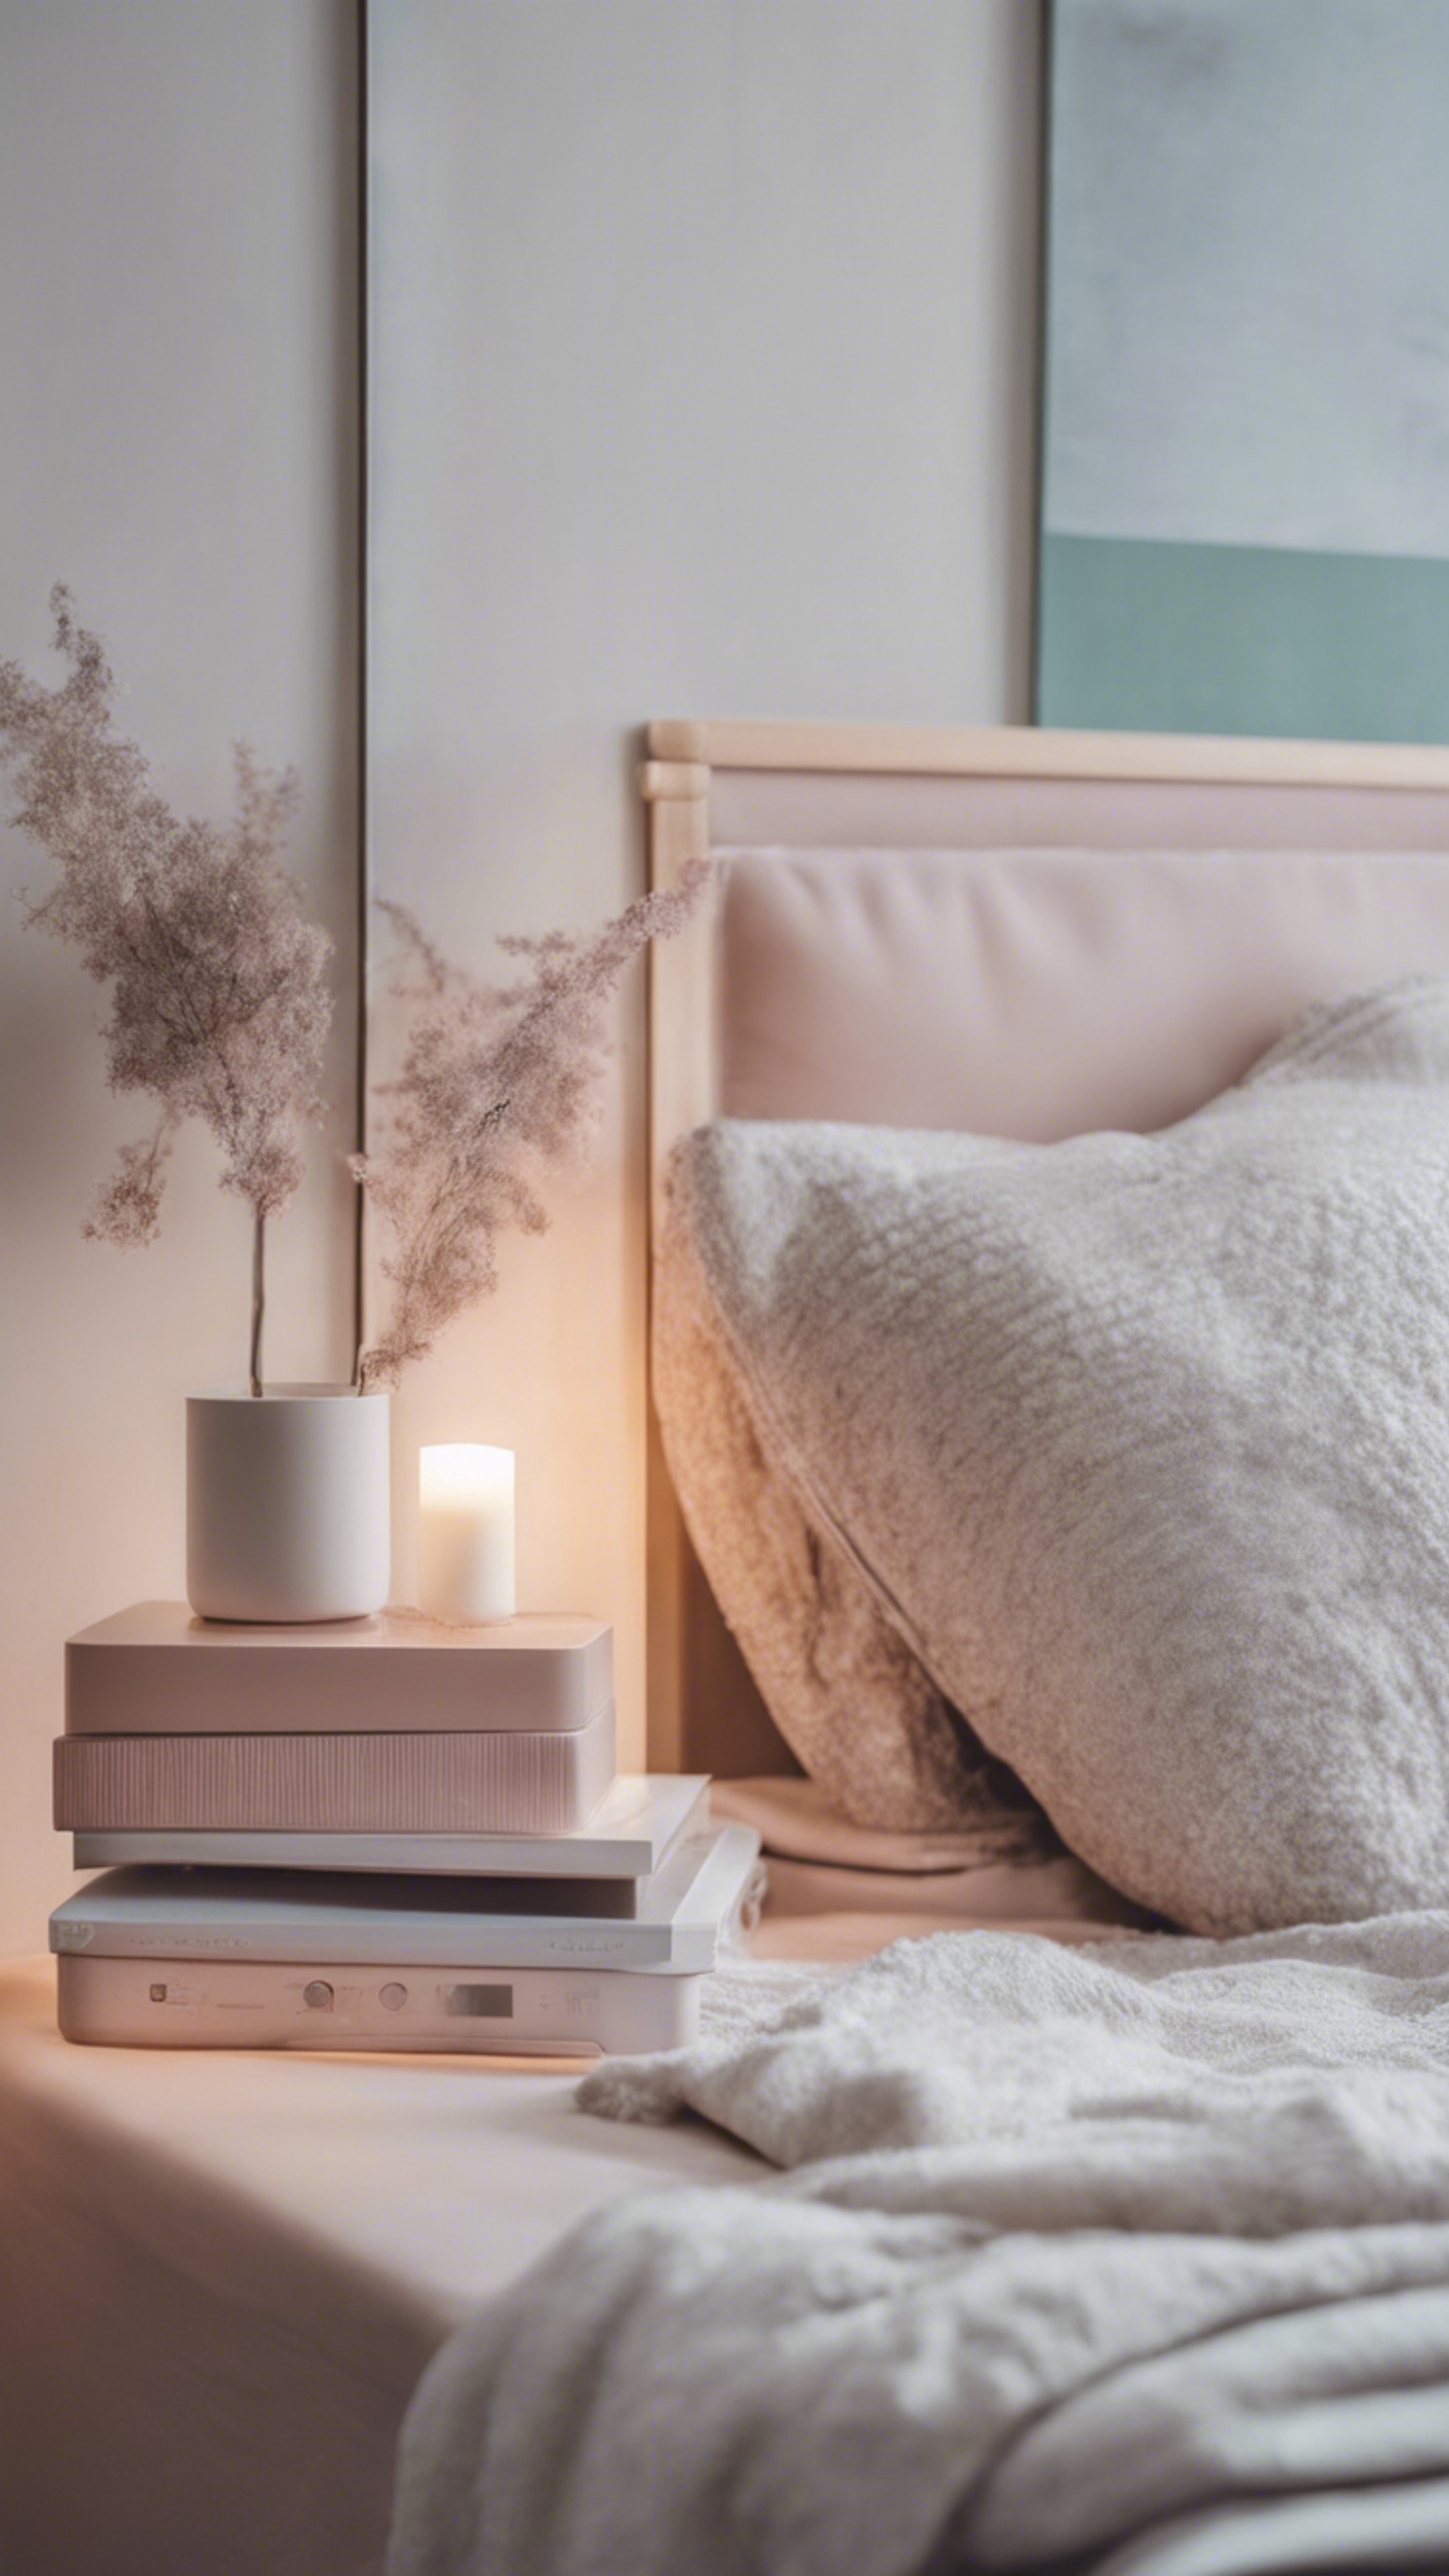 A modern minimalist bedroom in pastel hues with cozy blankets and a stylish bedside table. Papel de parede[e12df14007a0419d89d8]